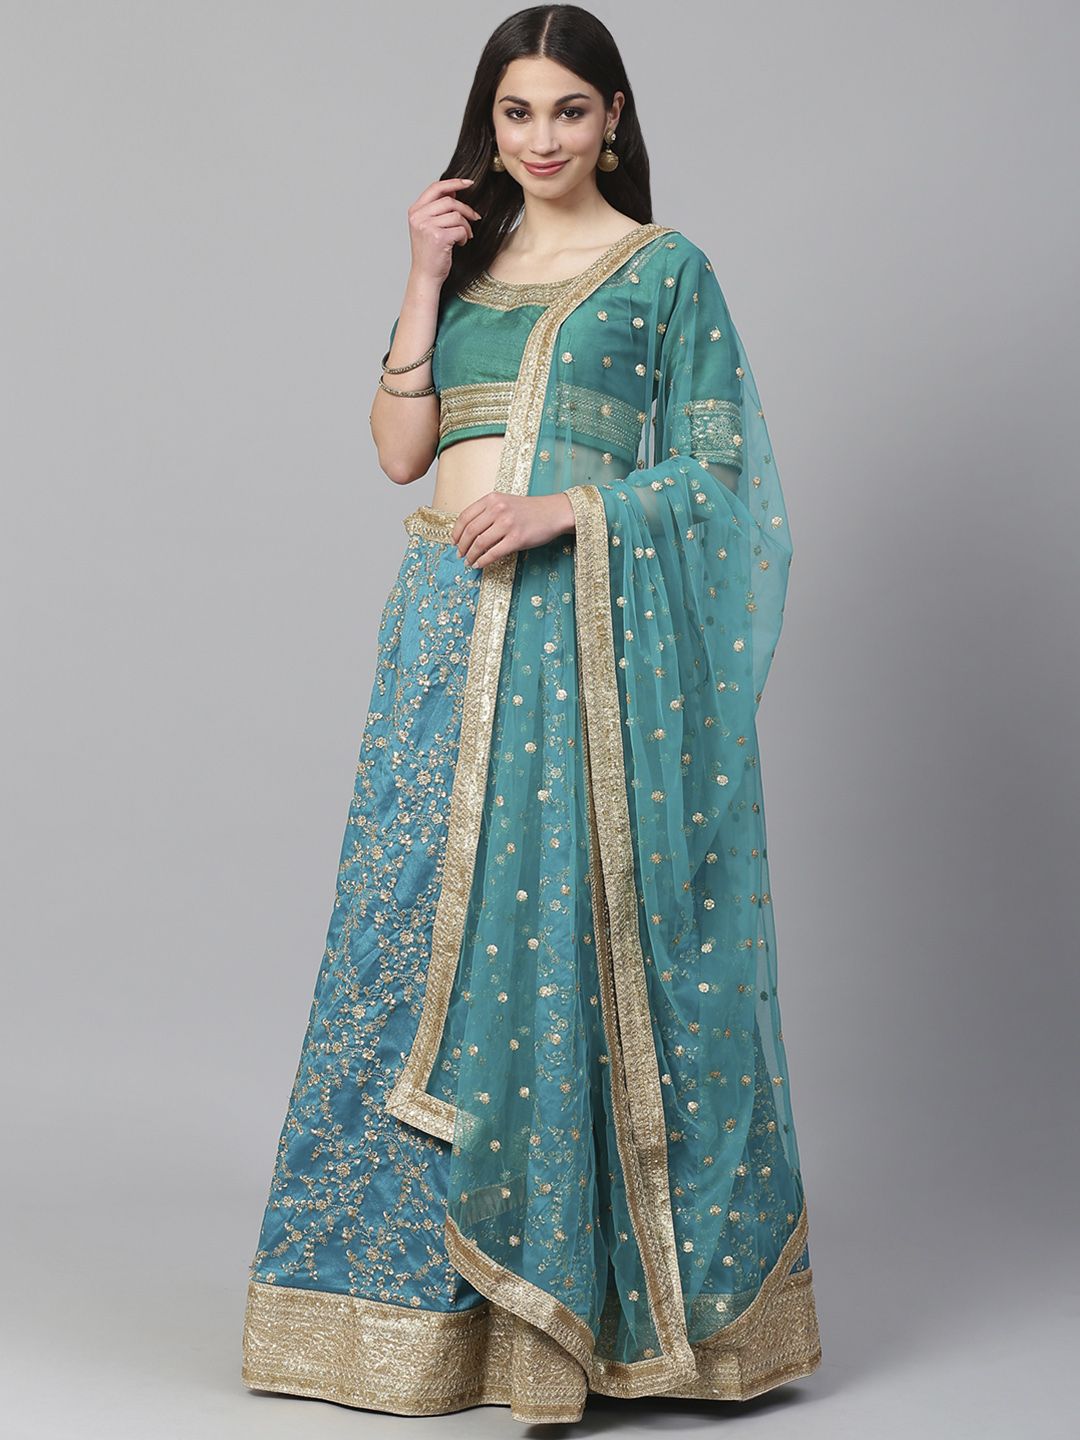 Readiprint Fashions Turquoise Blue Semi-Stitched Lehenga & Unstitched Blouse with Dupatta Price in India